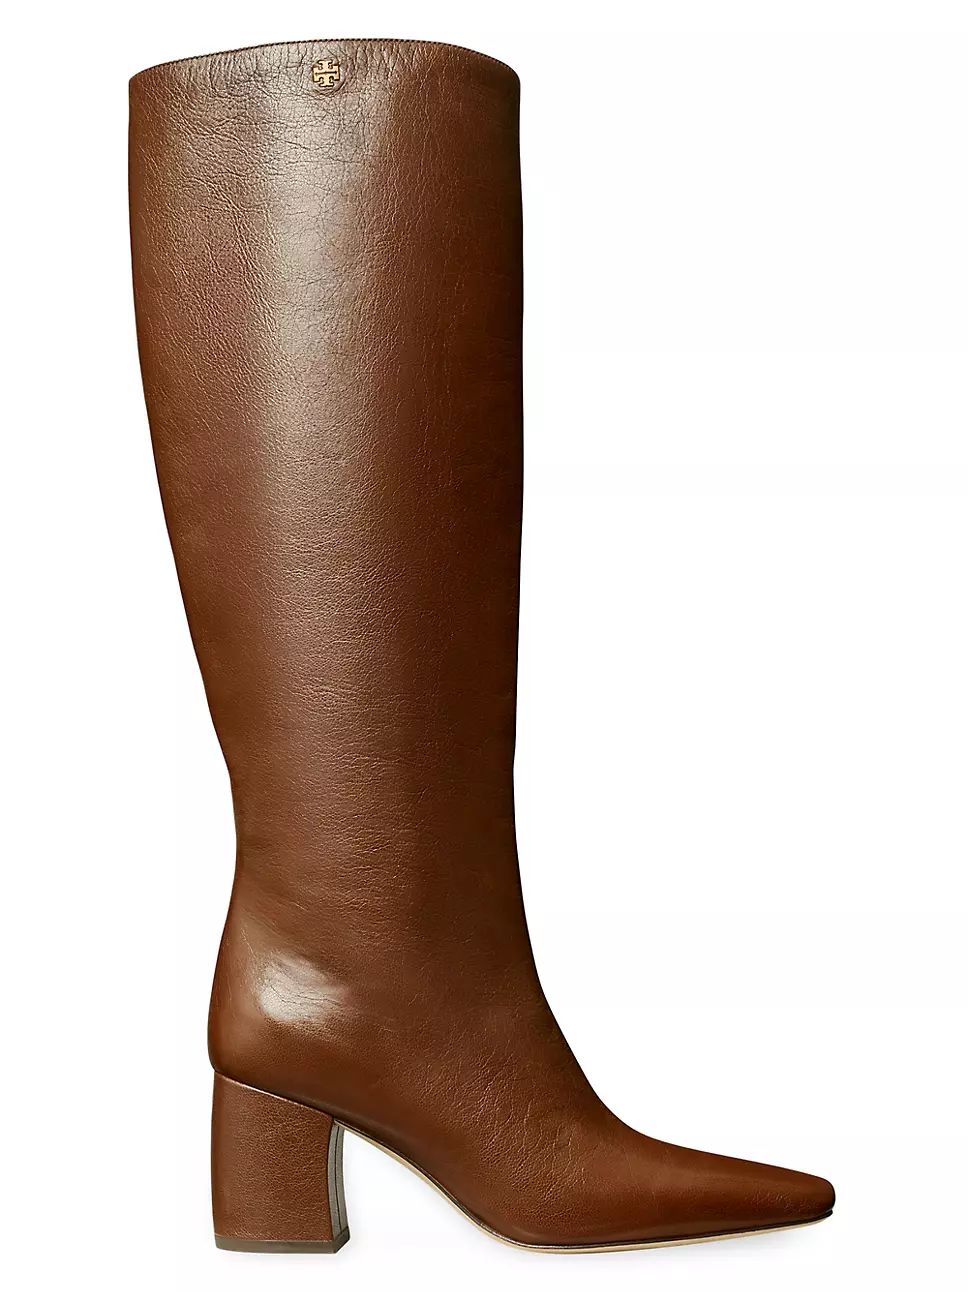 Tory Burch Banana 70MM Leather Knee-High Boots | Saks Fifth Avenue